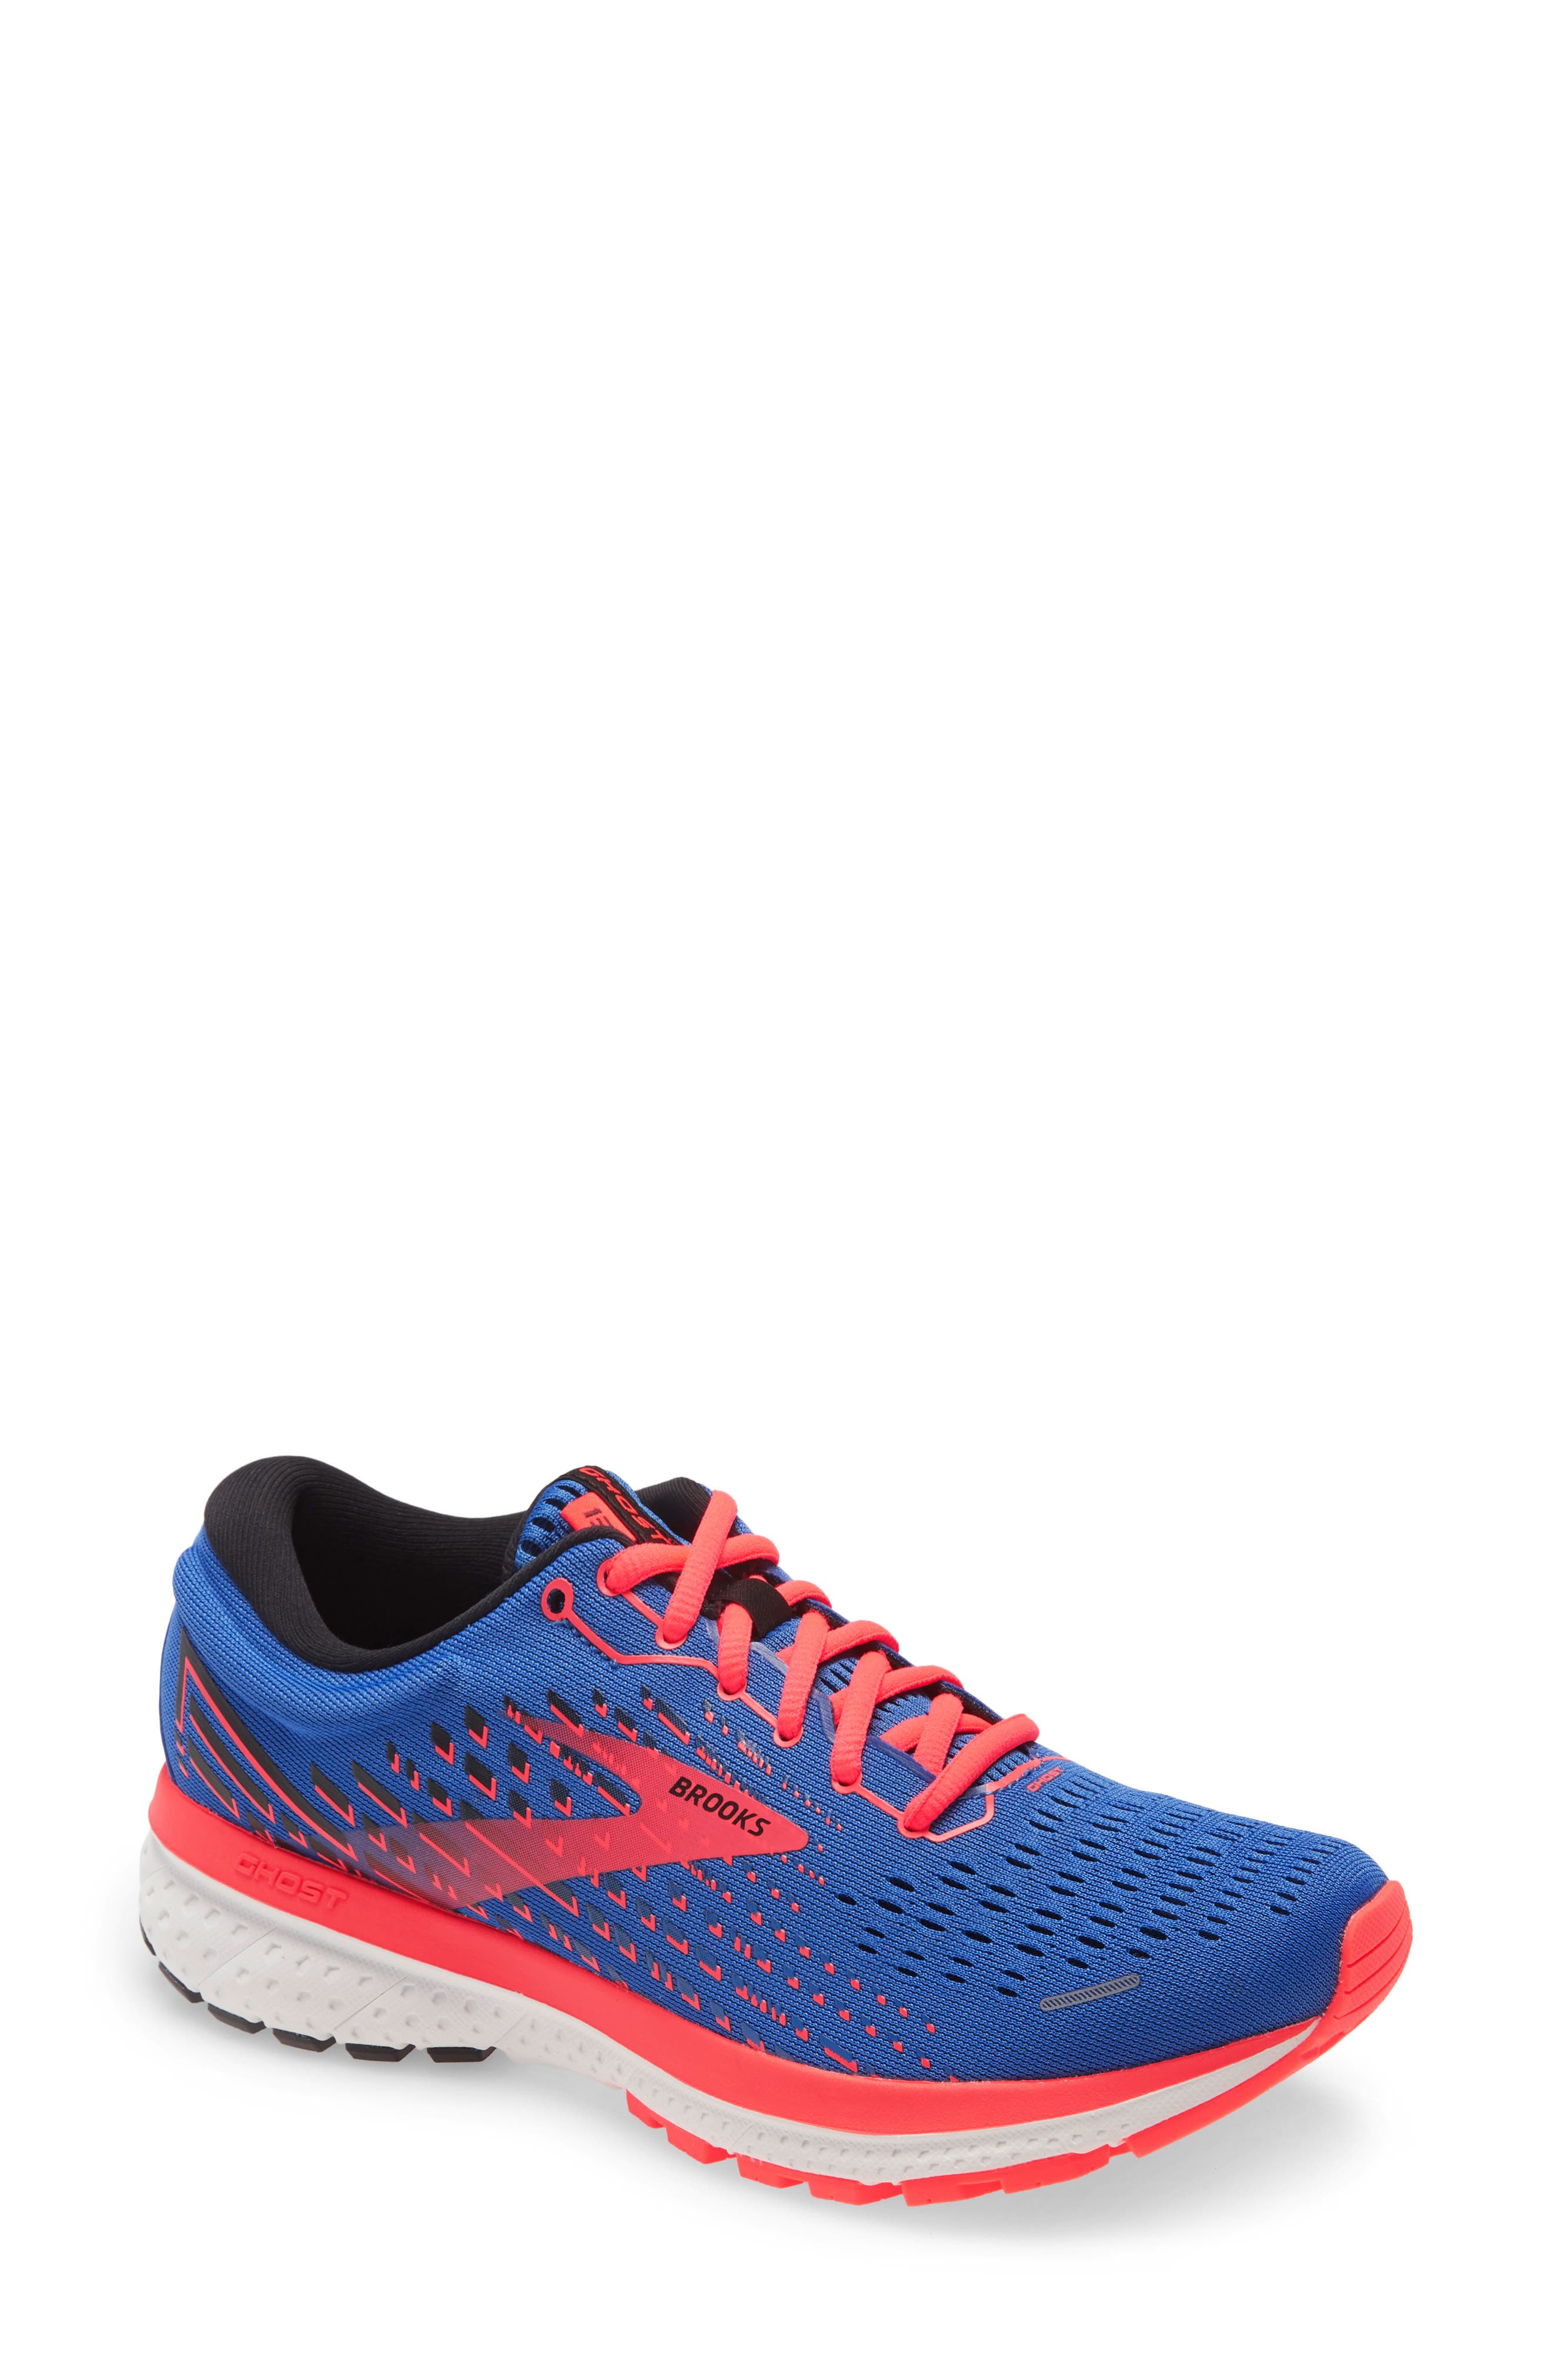 orange and blue gym shoes